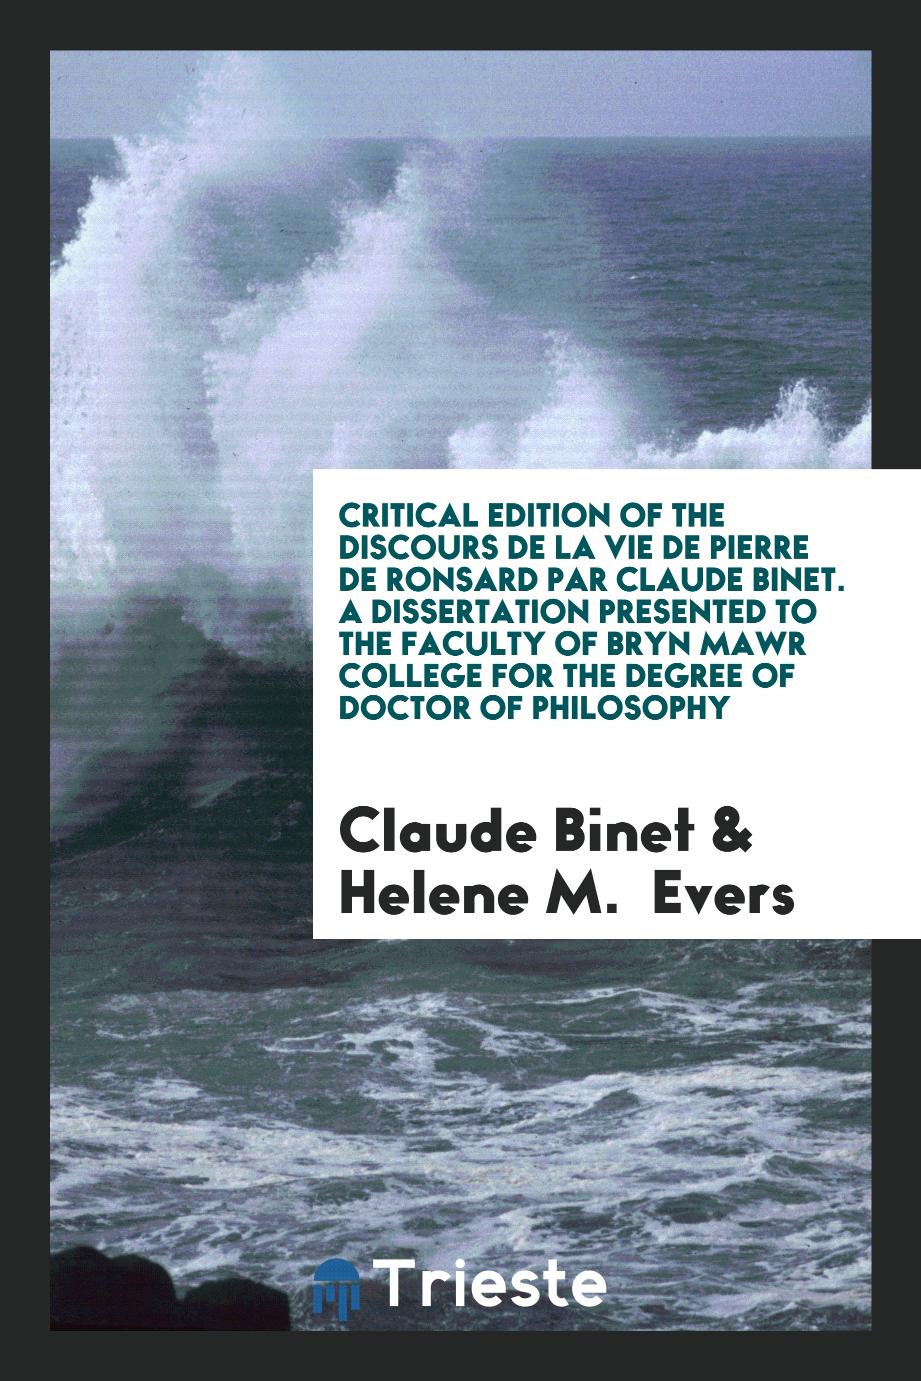 Critical Edition of the Discours de la Vie de Pierre de Ronsard Par Claude Binet. A Dissertation Presented to the Faculty of Bryn Mawr College for the Degree of Doctor of Philosophy